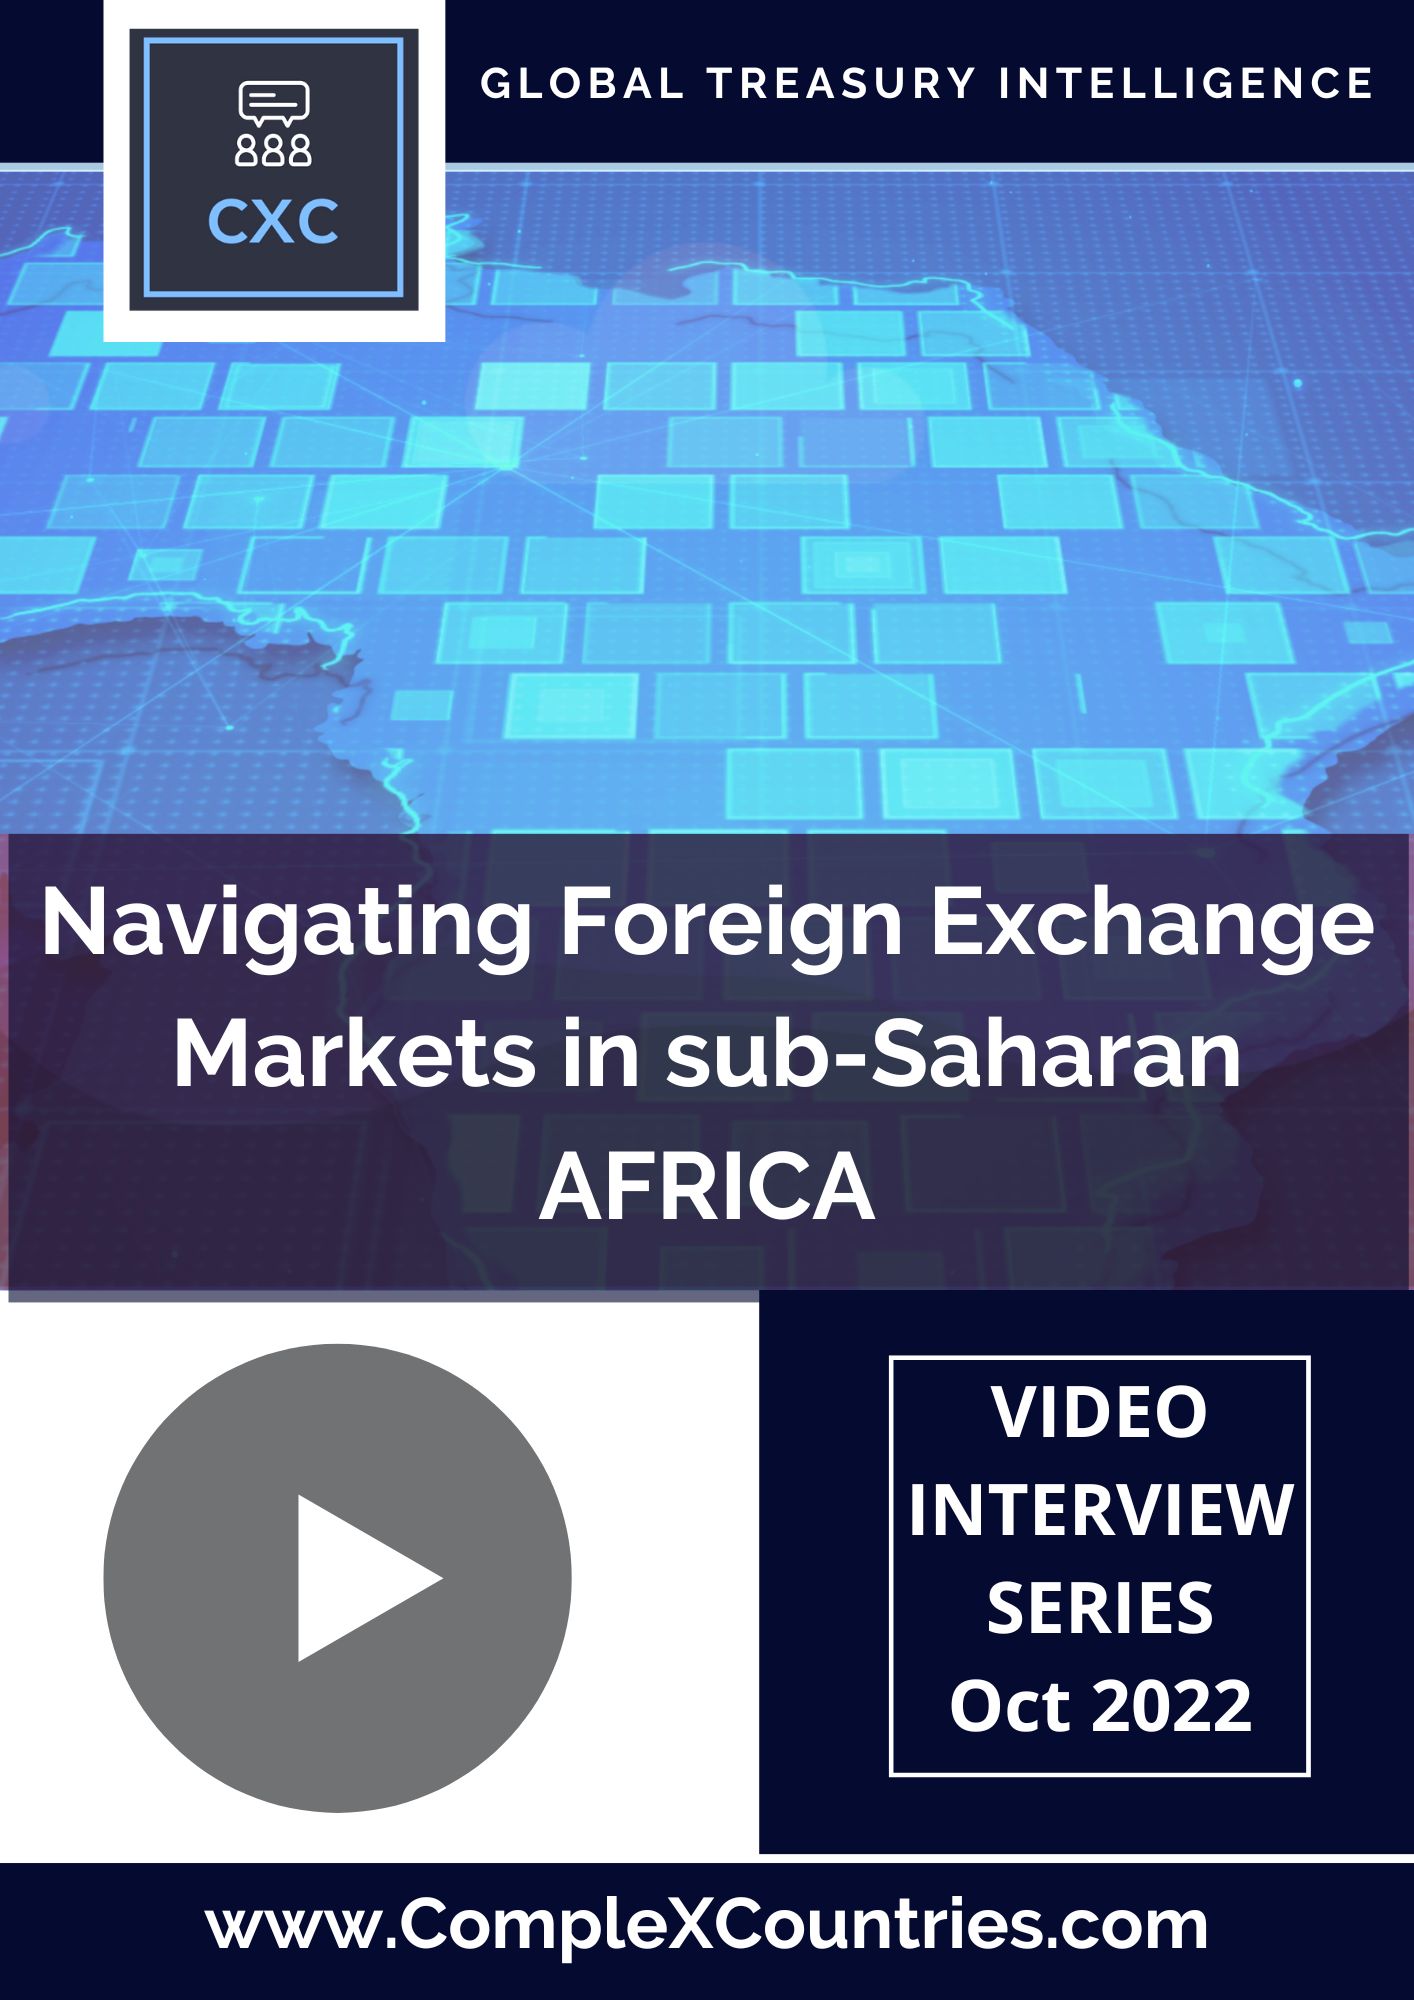 Navigating Foreign Exchange Markets in sub-Saharan Africa